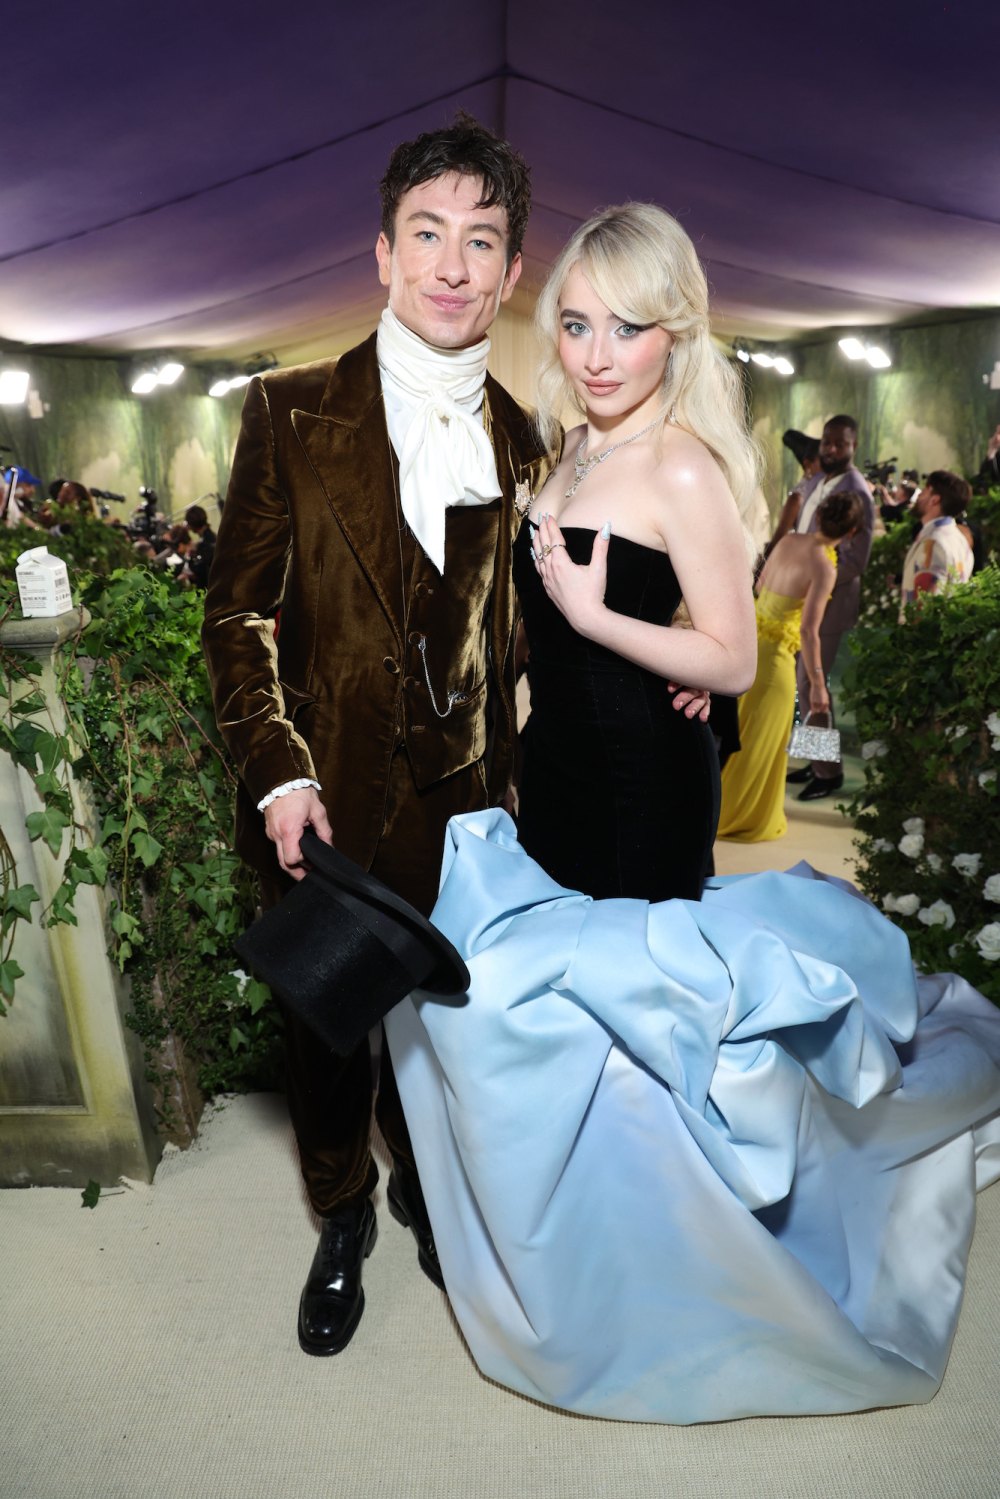 Barry Keoghan Said Oh S t When He 1st Saw Sabrina Carpenter s Met Dress